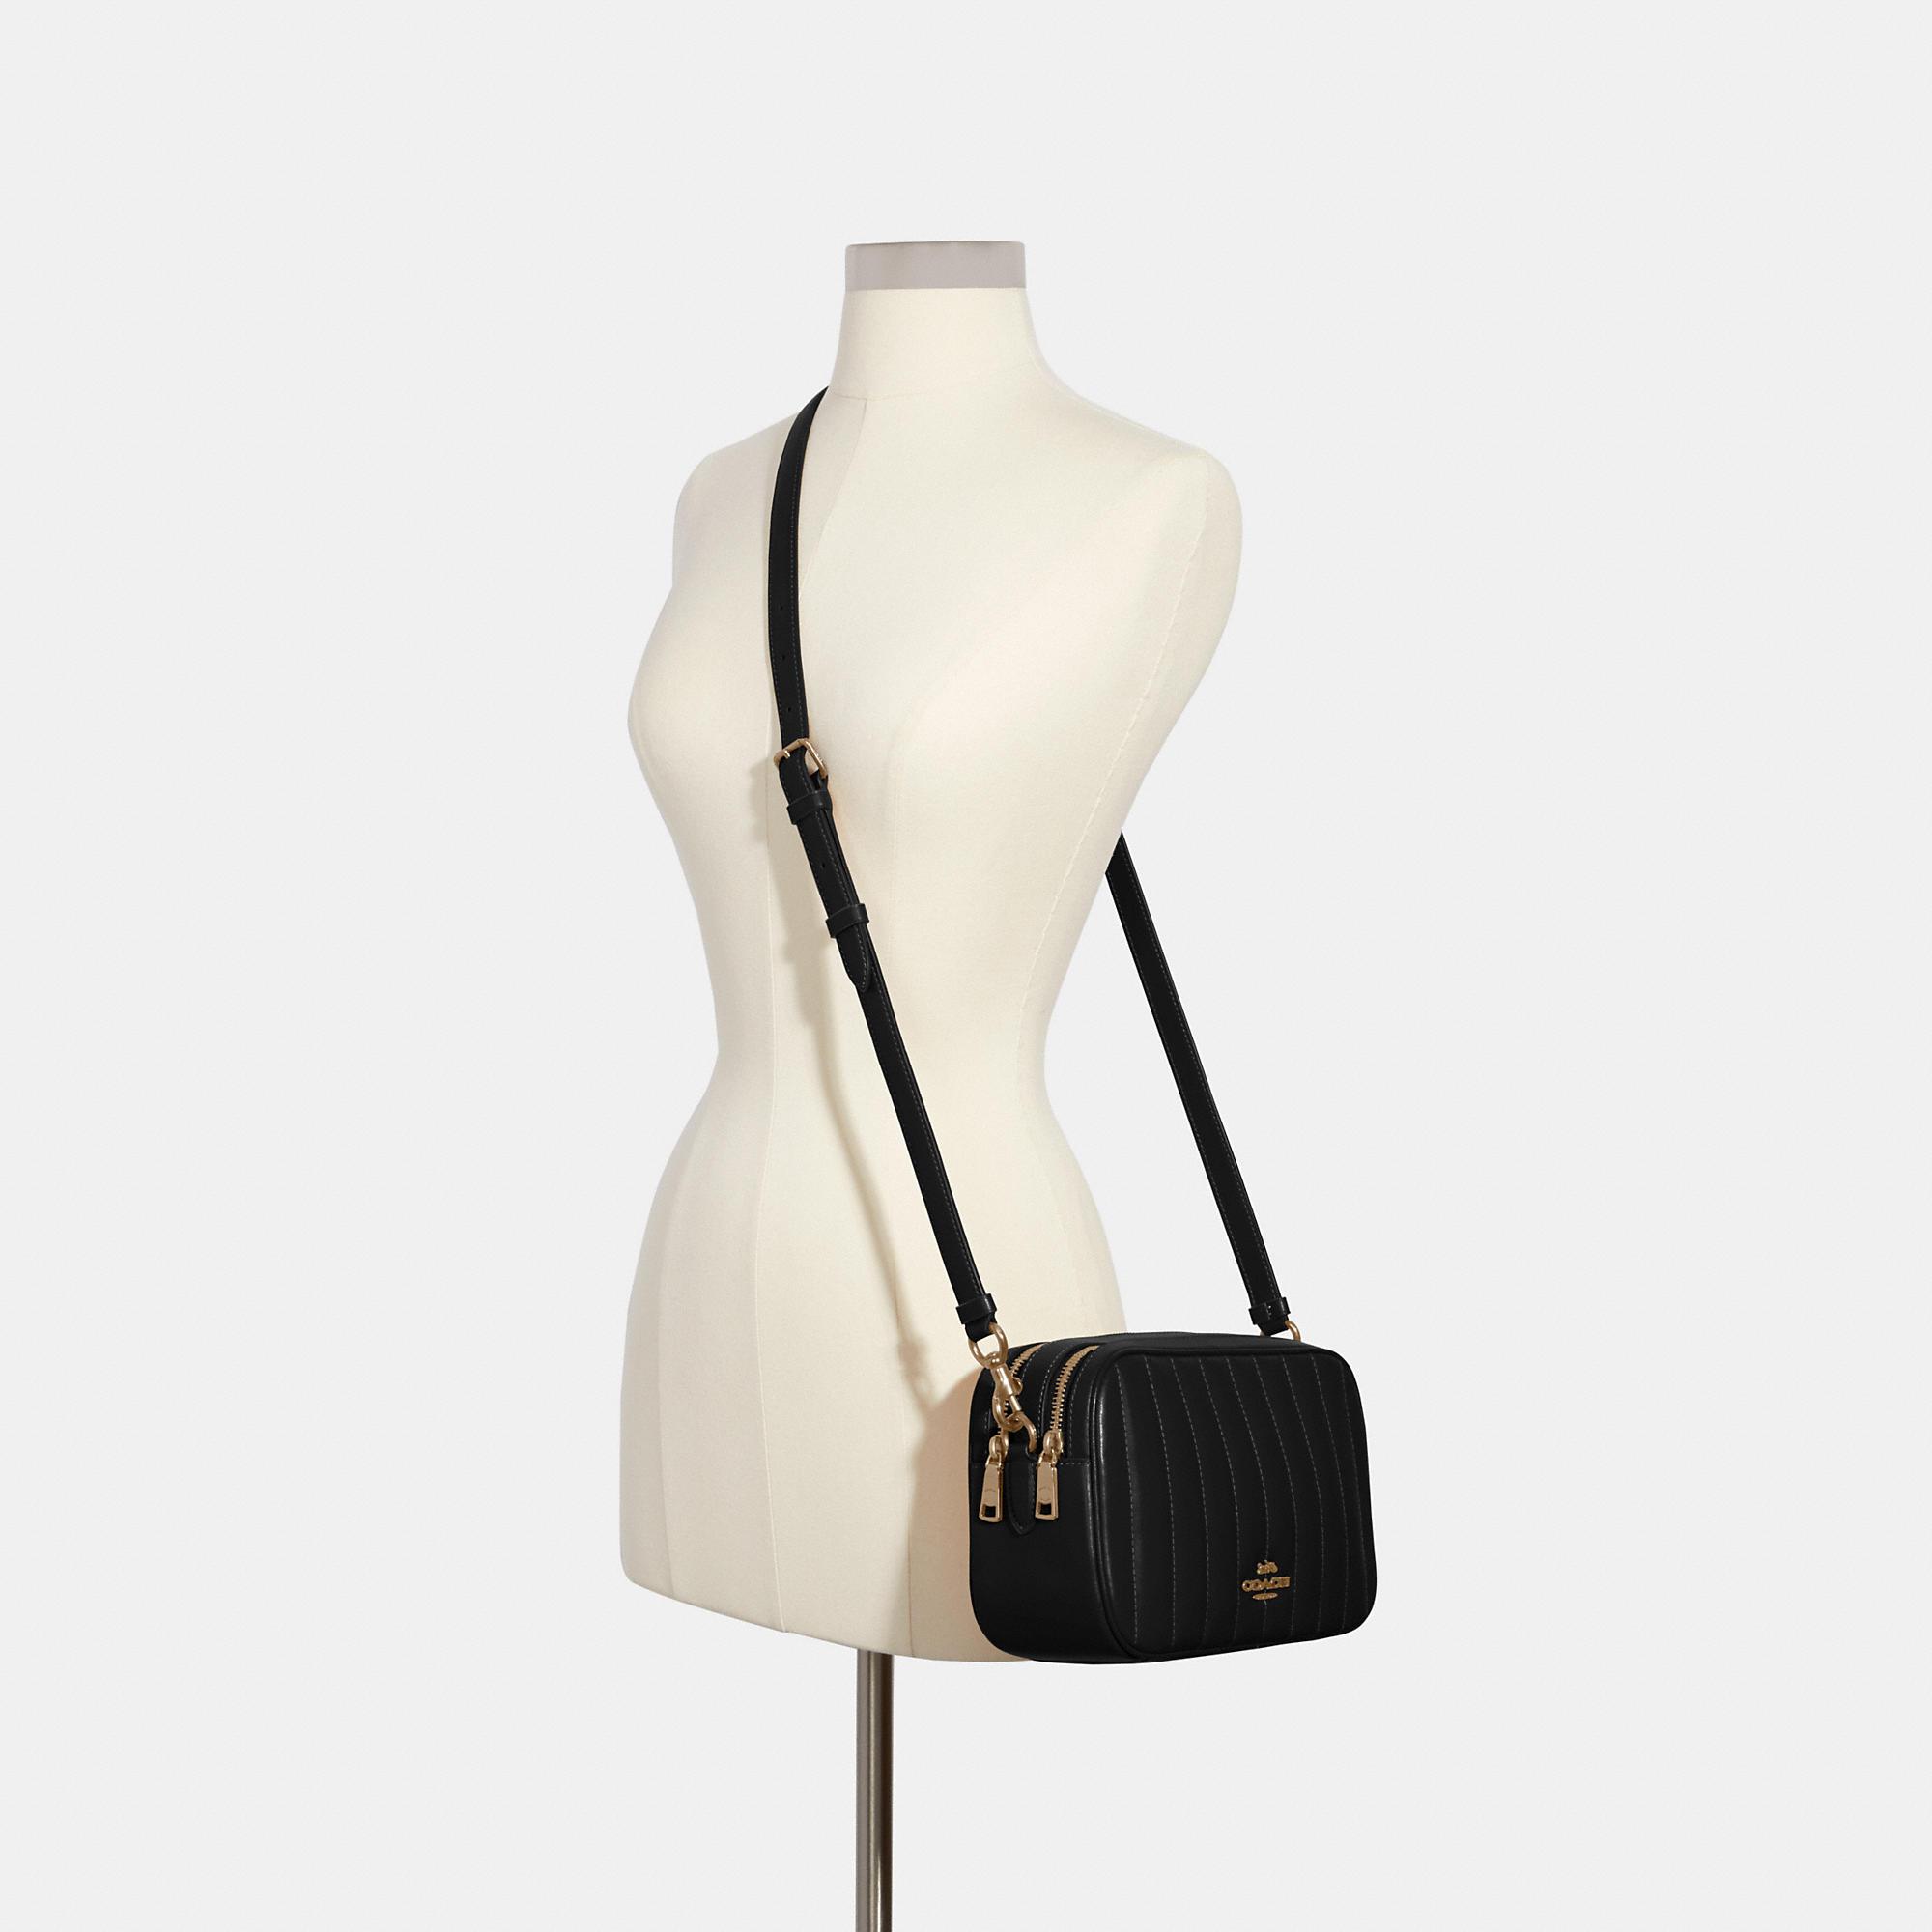 COACH Jes Crossbody Bag With Linear Quilting in Black